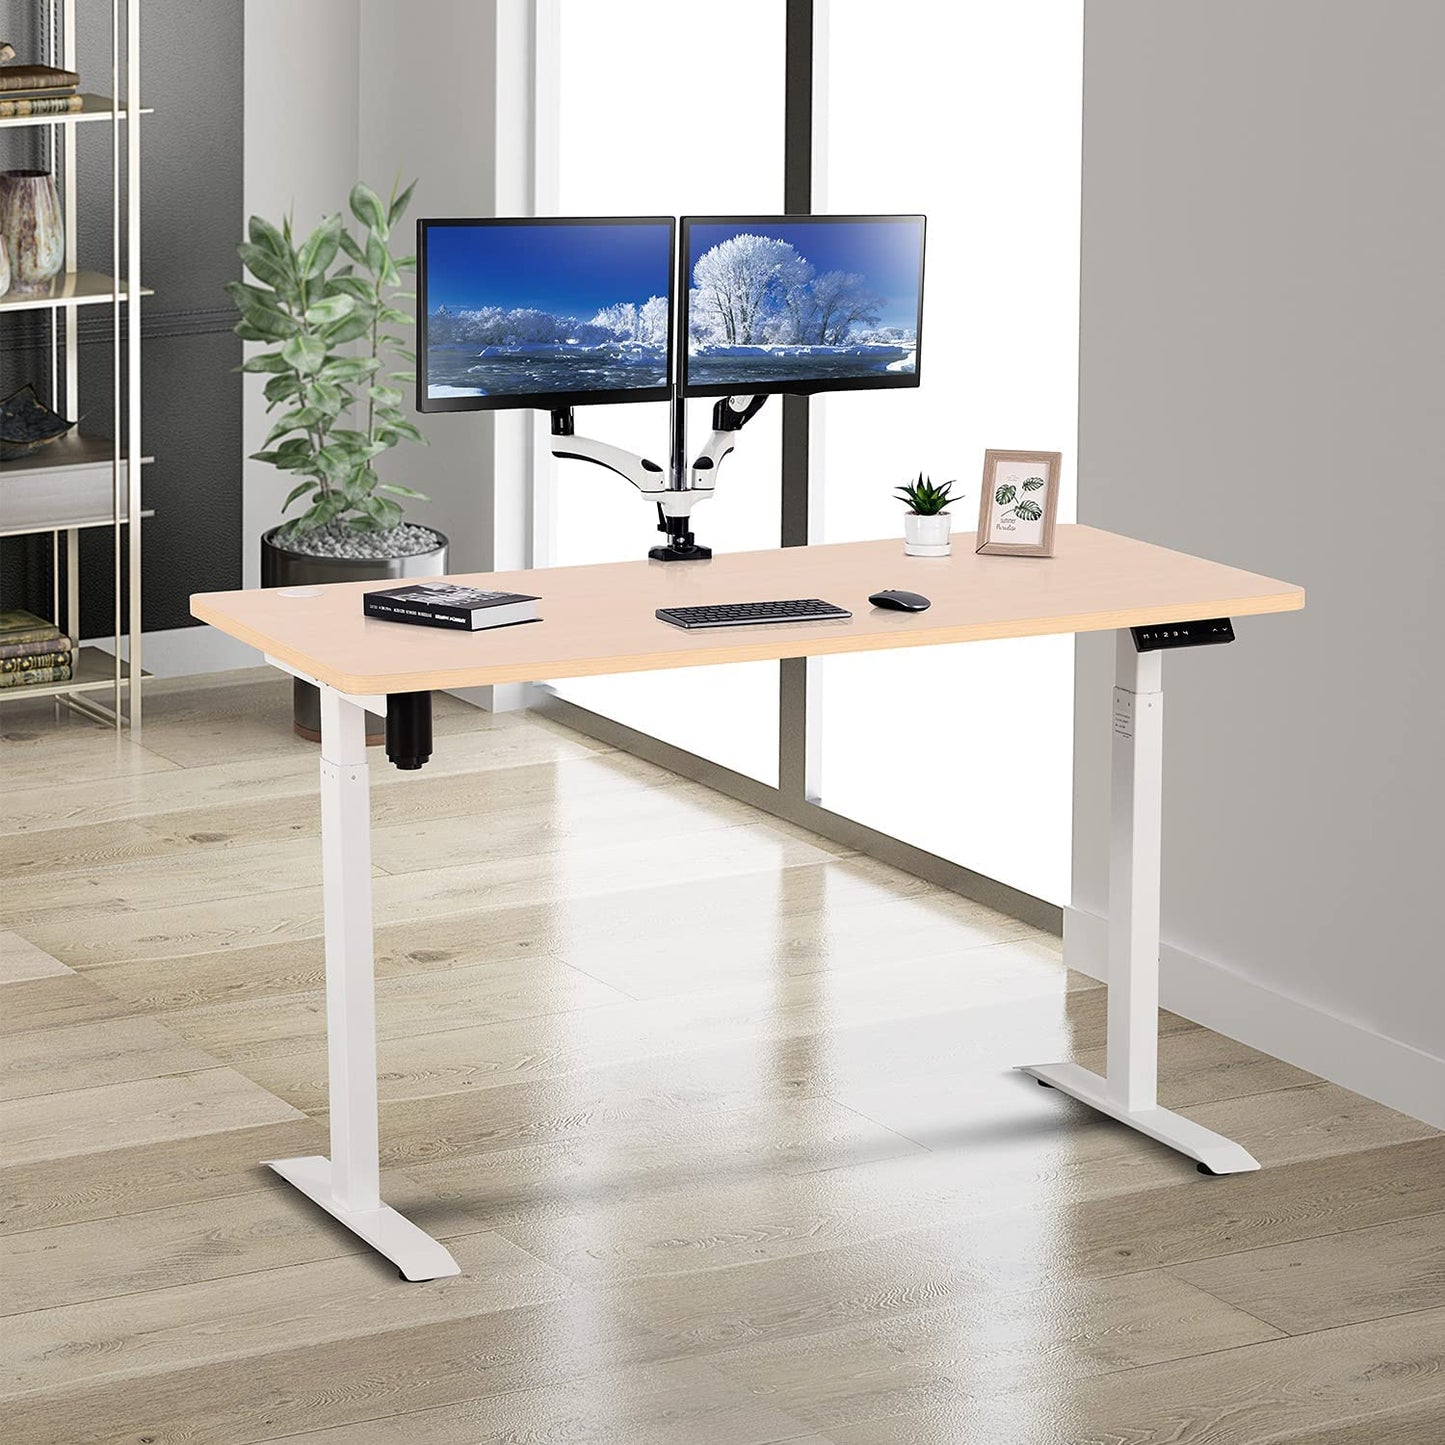 UNICOO – Height Adjustable Electric Standing Desk, 55 x 27.6 Inches Stand up Table, Sit Stand Home Office Desk with One Piece Tabletop (NTESMF01+ 55 IN TOP)